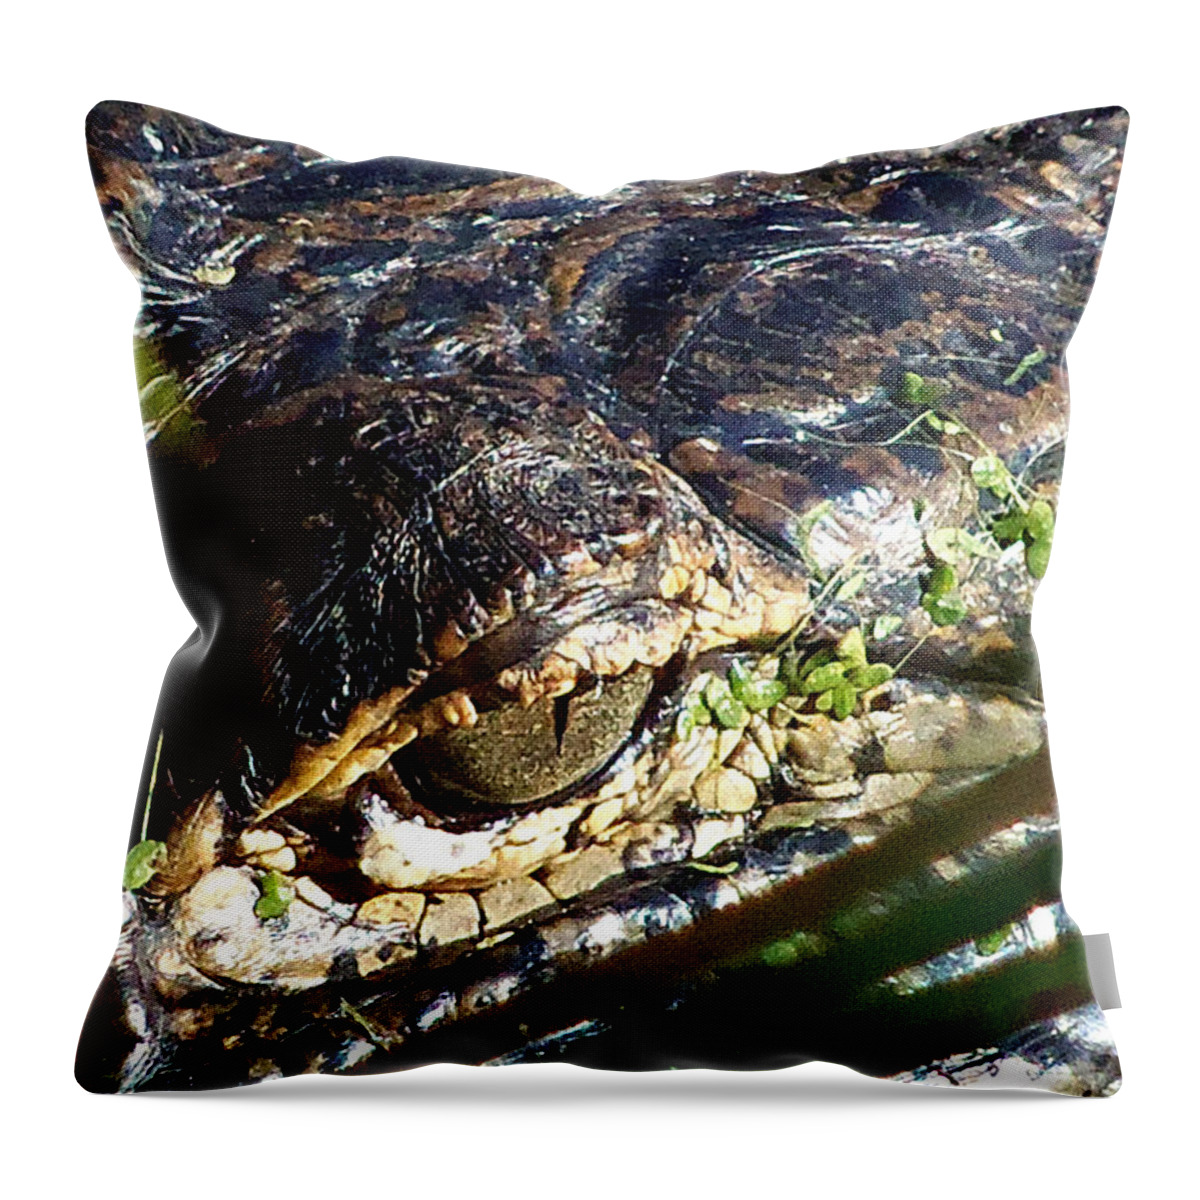 Animals Throw Pillow featuring the photograph Alligator Eye by Christopher Mercer